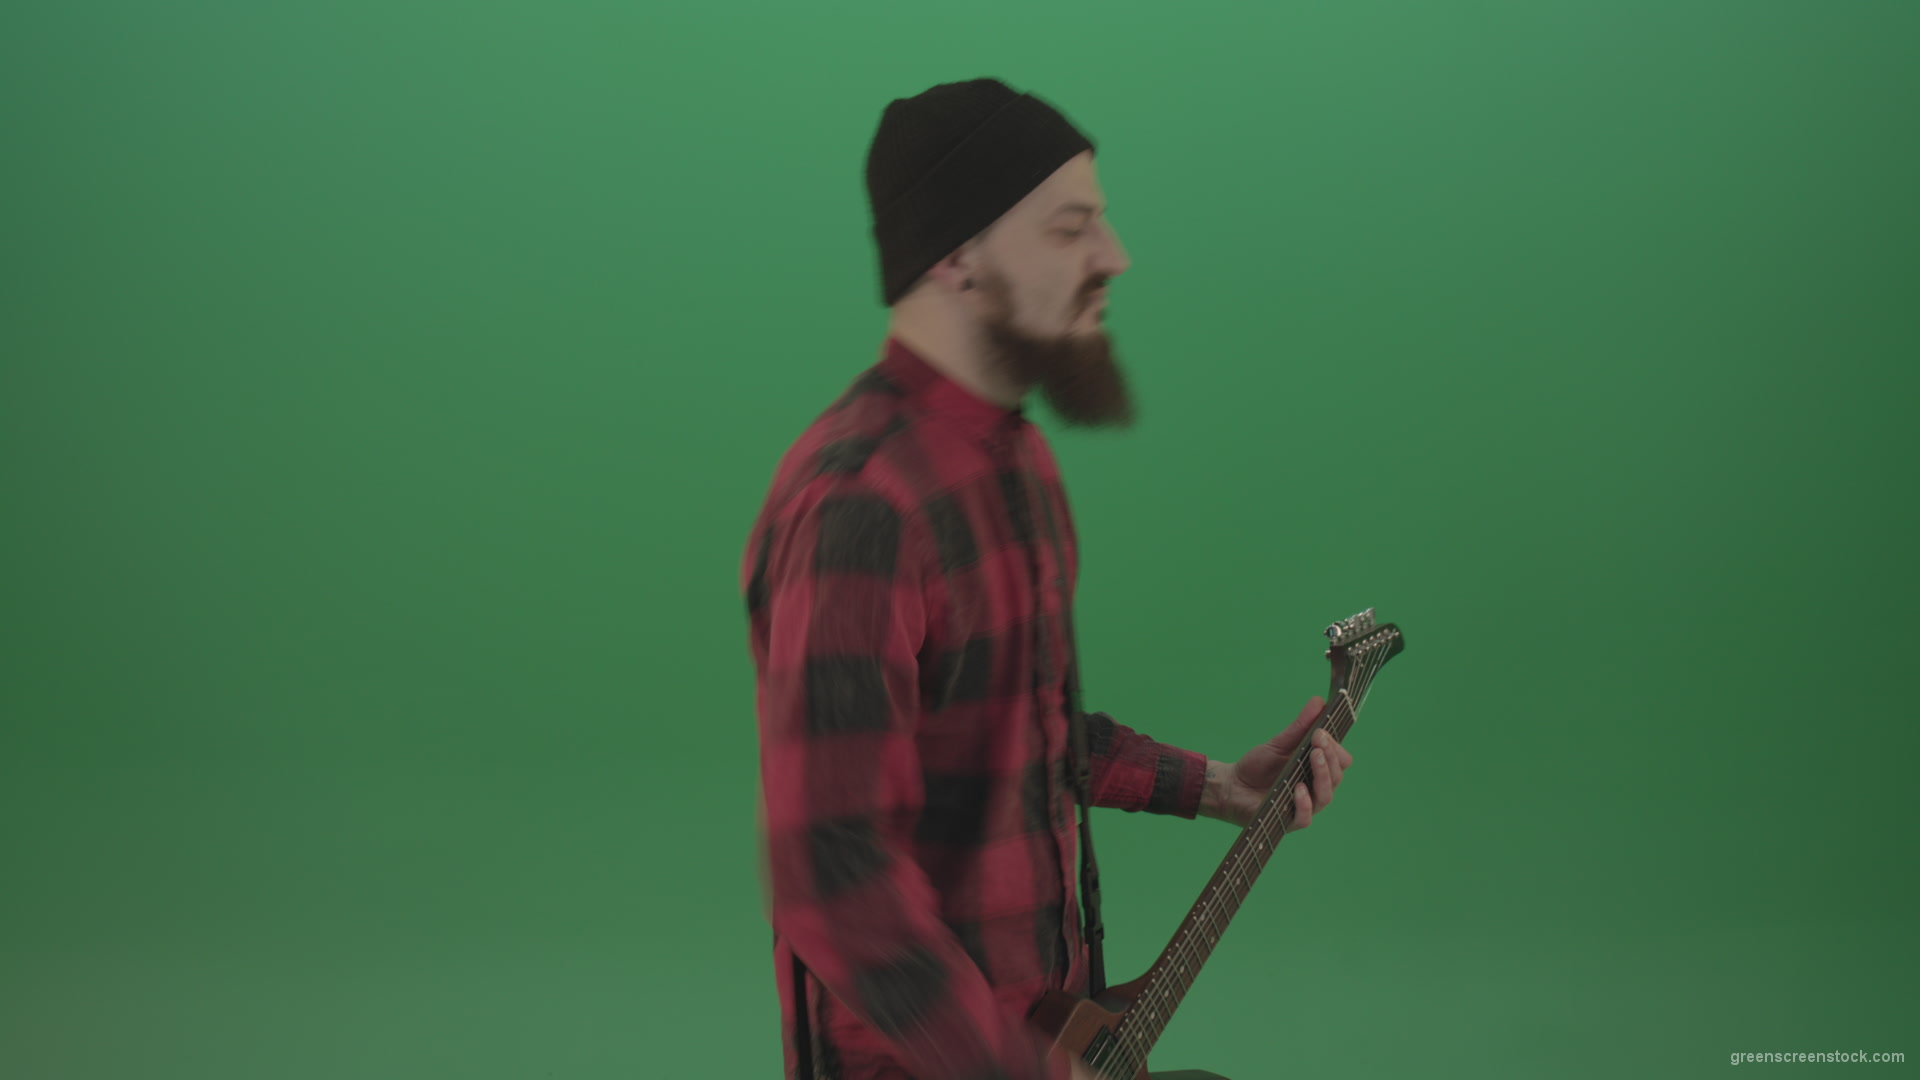 Angry-punk-rock-man-guitarist-play-guitar-and-scream-death-hardcore-music-isolated-on-green-screen_004 Green Screen Stock